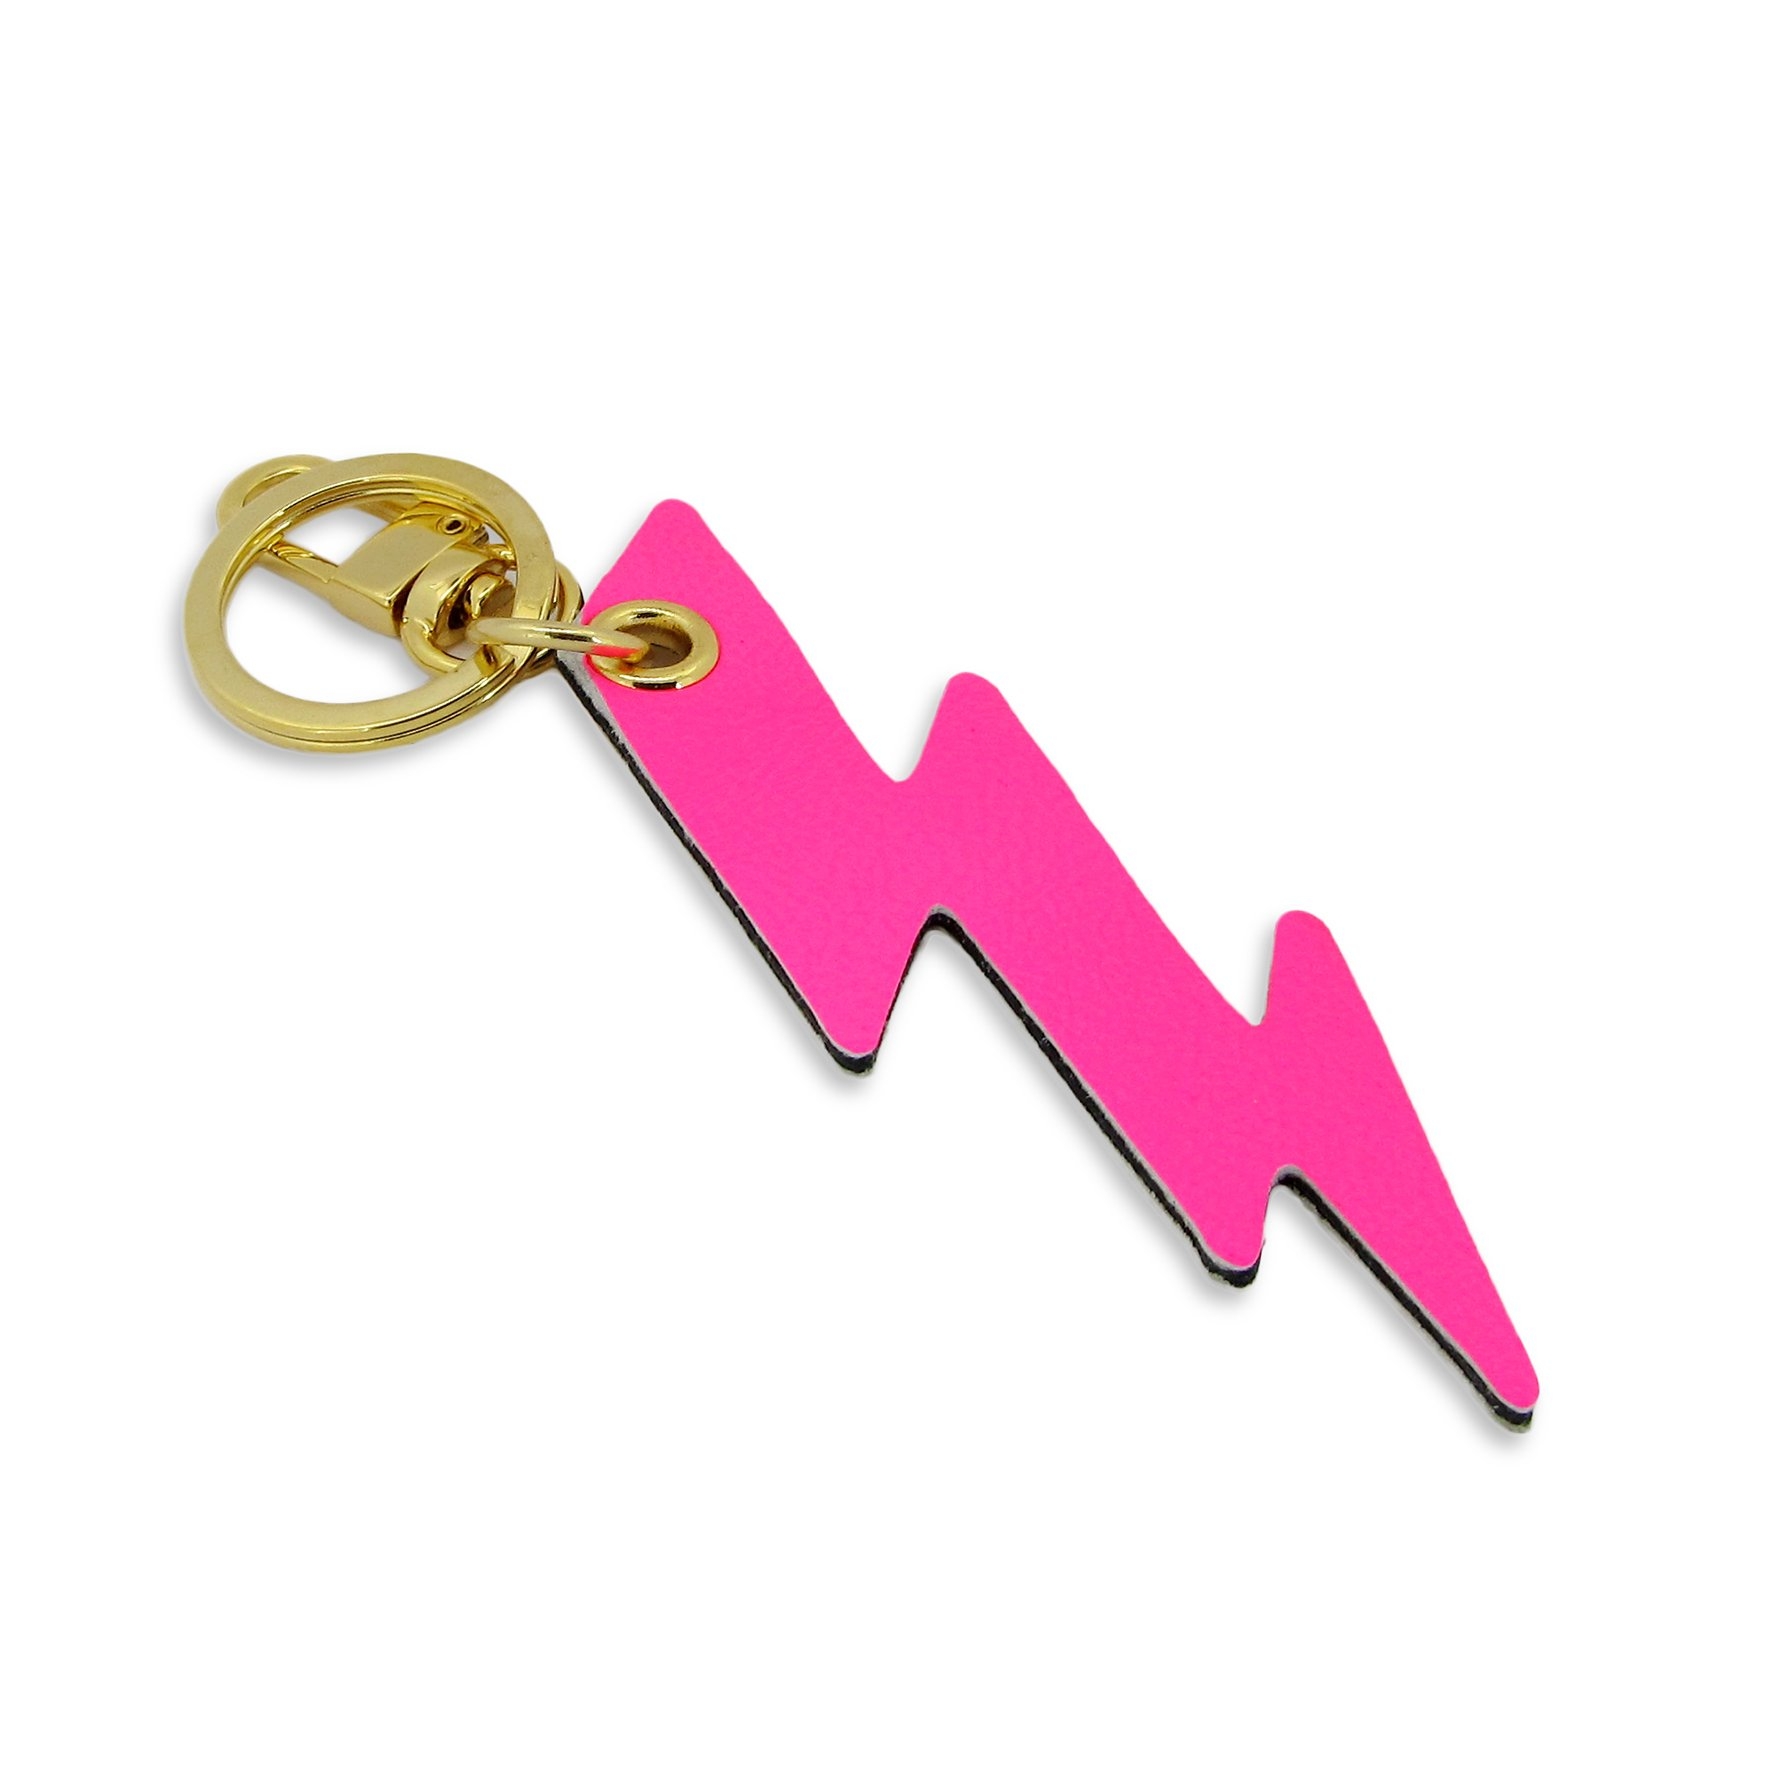 Leather Key Ring / Bag Charm – Lightning Bolt – Pink and Gold